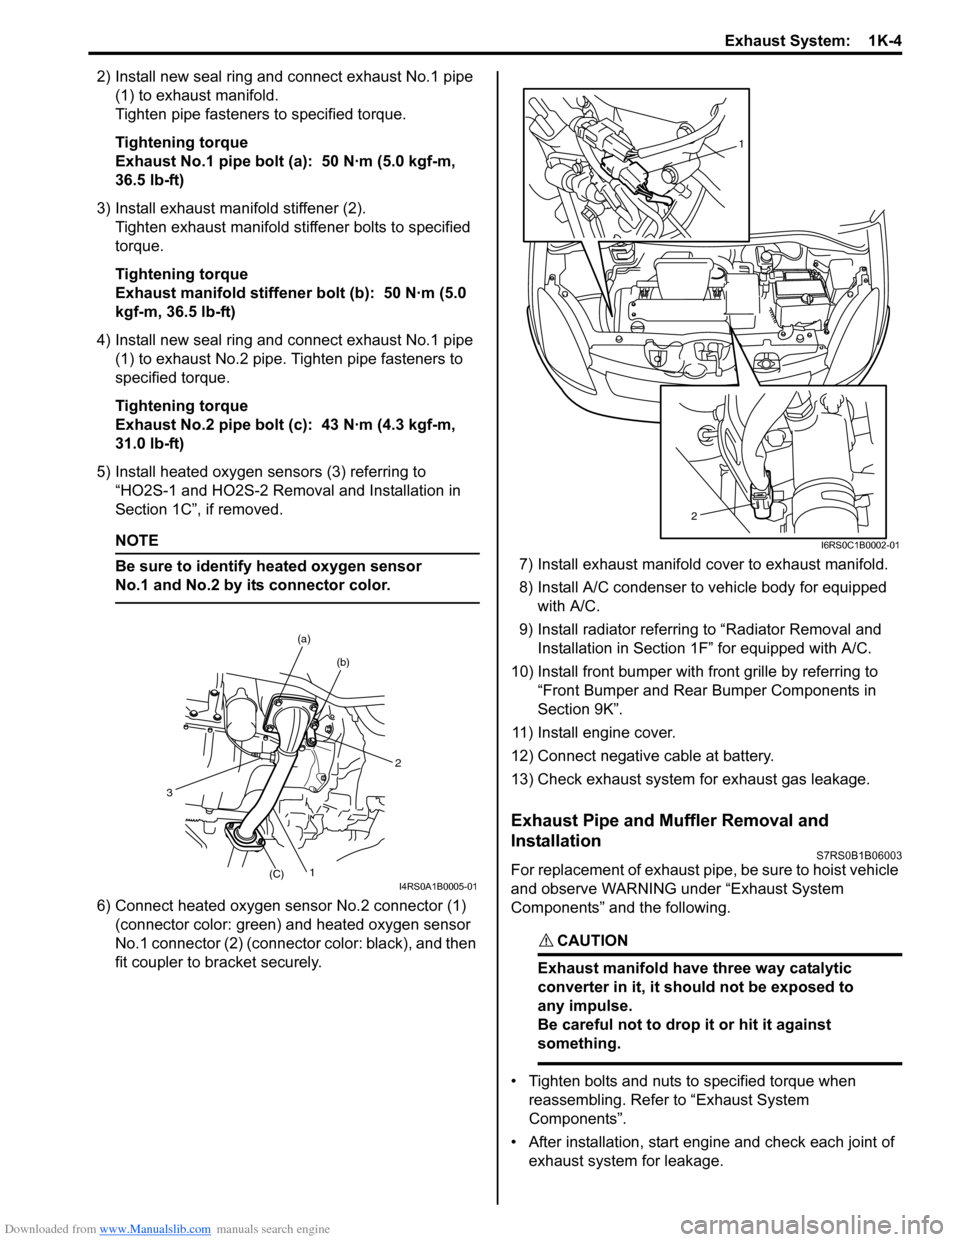 SUZUKI SWIFT 2008 2.G Service Repair Manual Downloaded from www.Manualslib.com manuals search engine Exhaust System:  1K-4
2) Install new seal ring and connect exhaust No.1 pipe (1) to exhaust manifold.
Tighten pipe fasteners to specified torqu